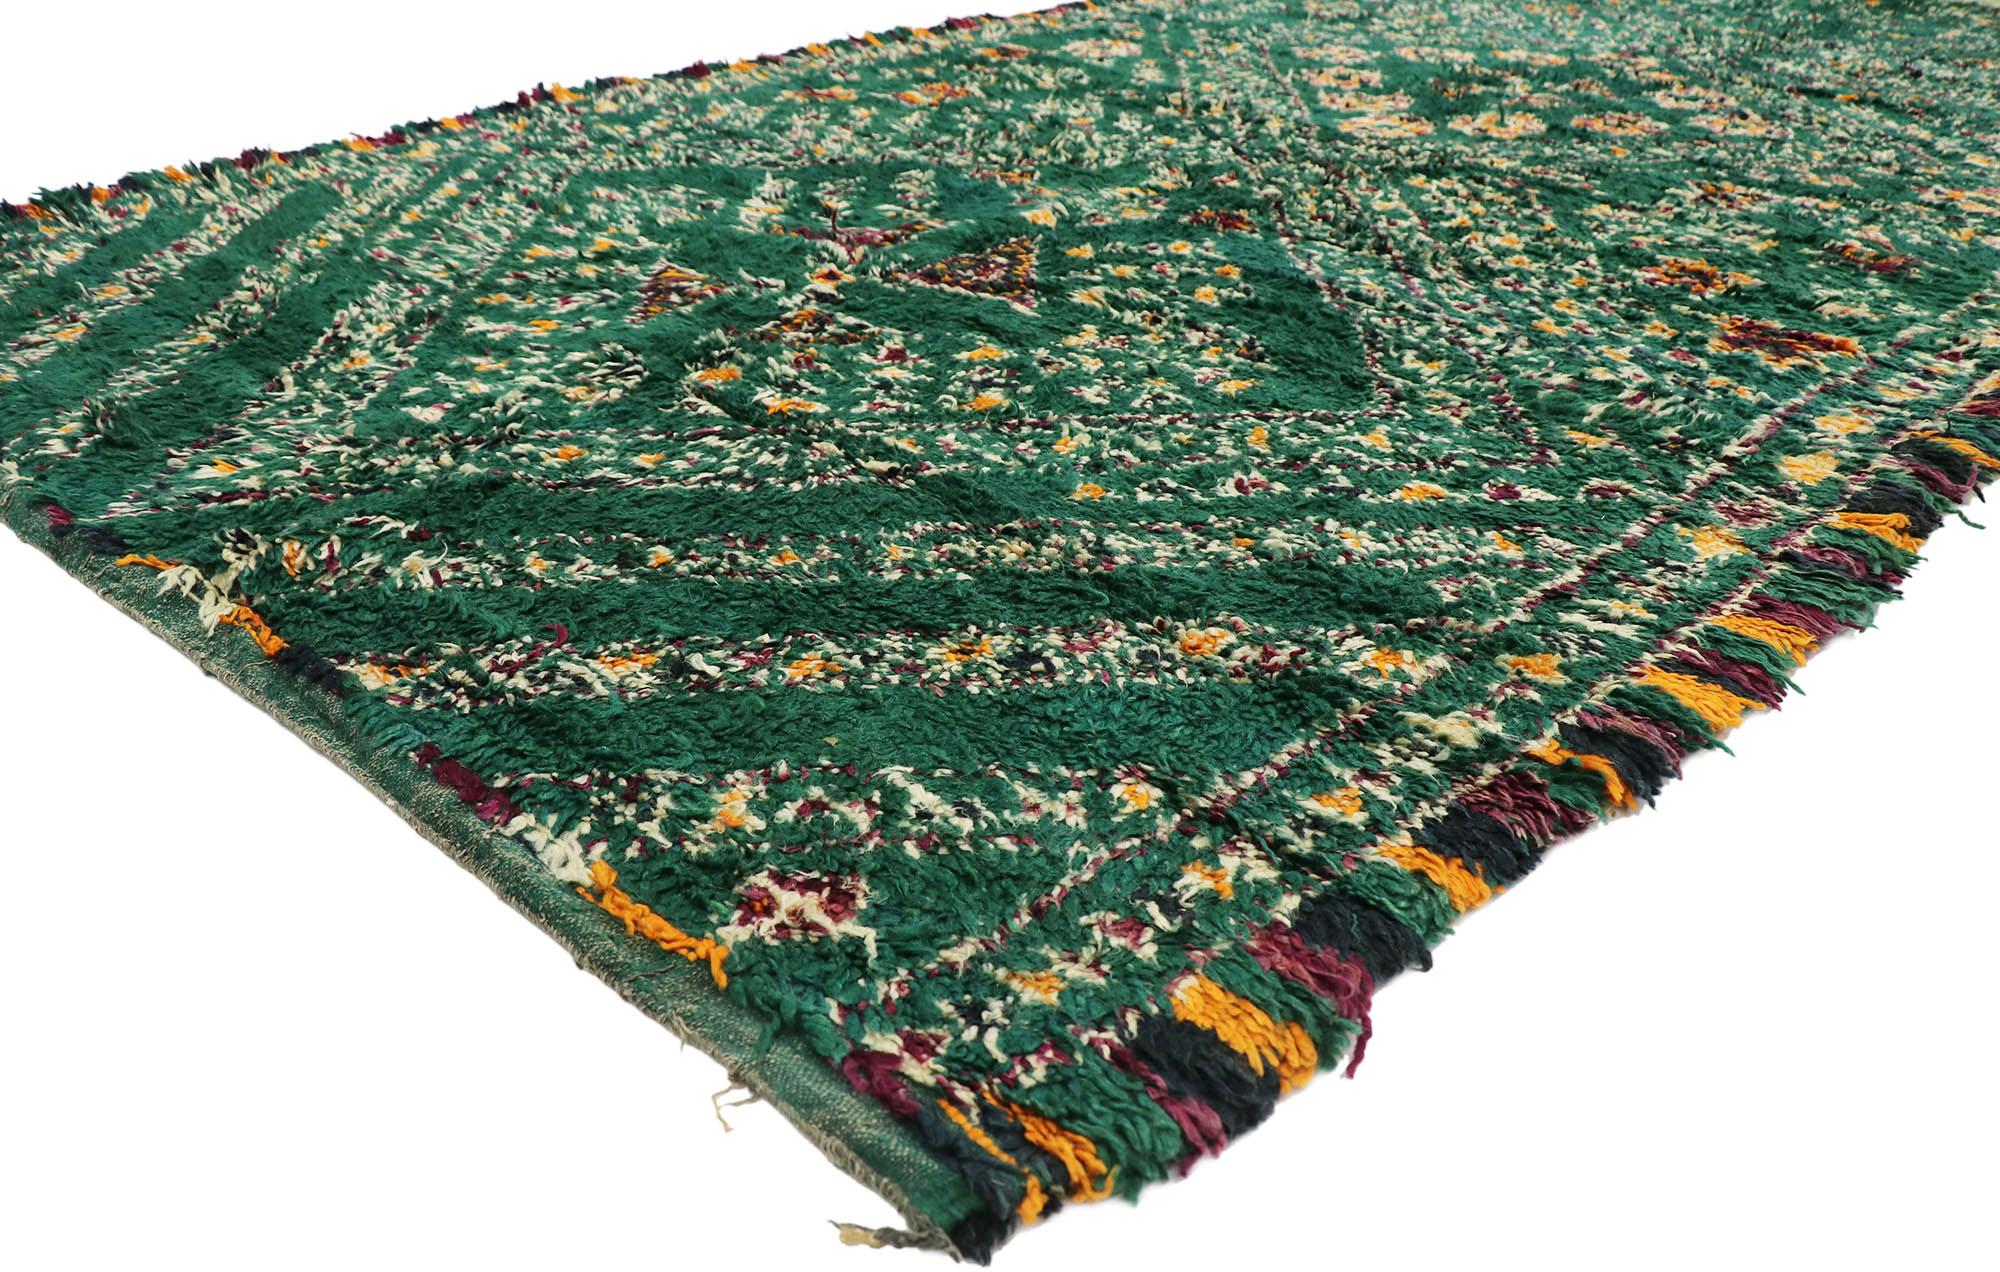 21322 Vintage green Beni M'Guild Moroccan rug with Jungalow style 07'00 x 14'00. Showcasing a bold expressive design, incredible detail and texture, this hand knotted wool vintage green Beni M'Guild Moroccan rug is a captivating vision of woven